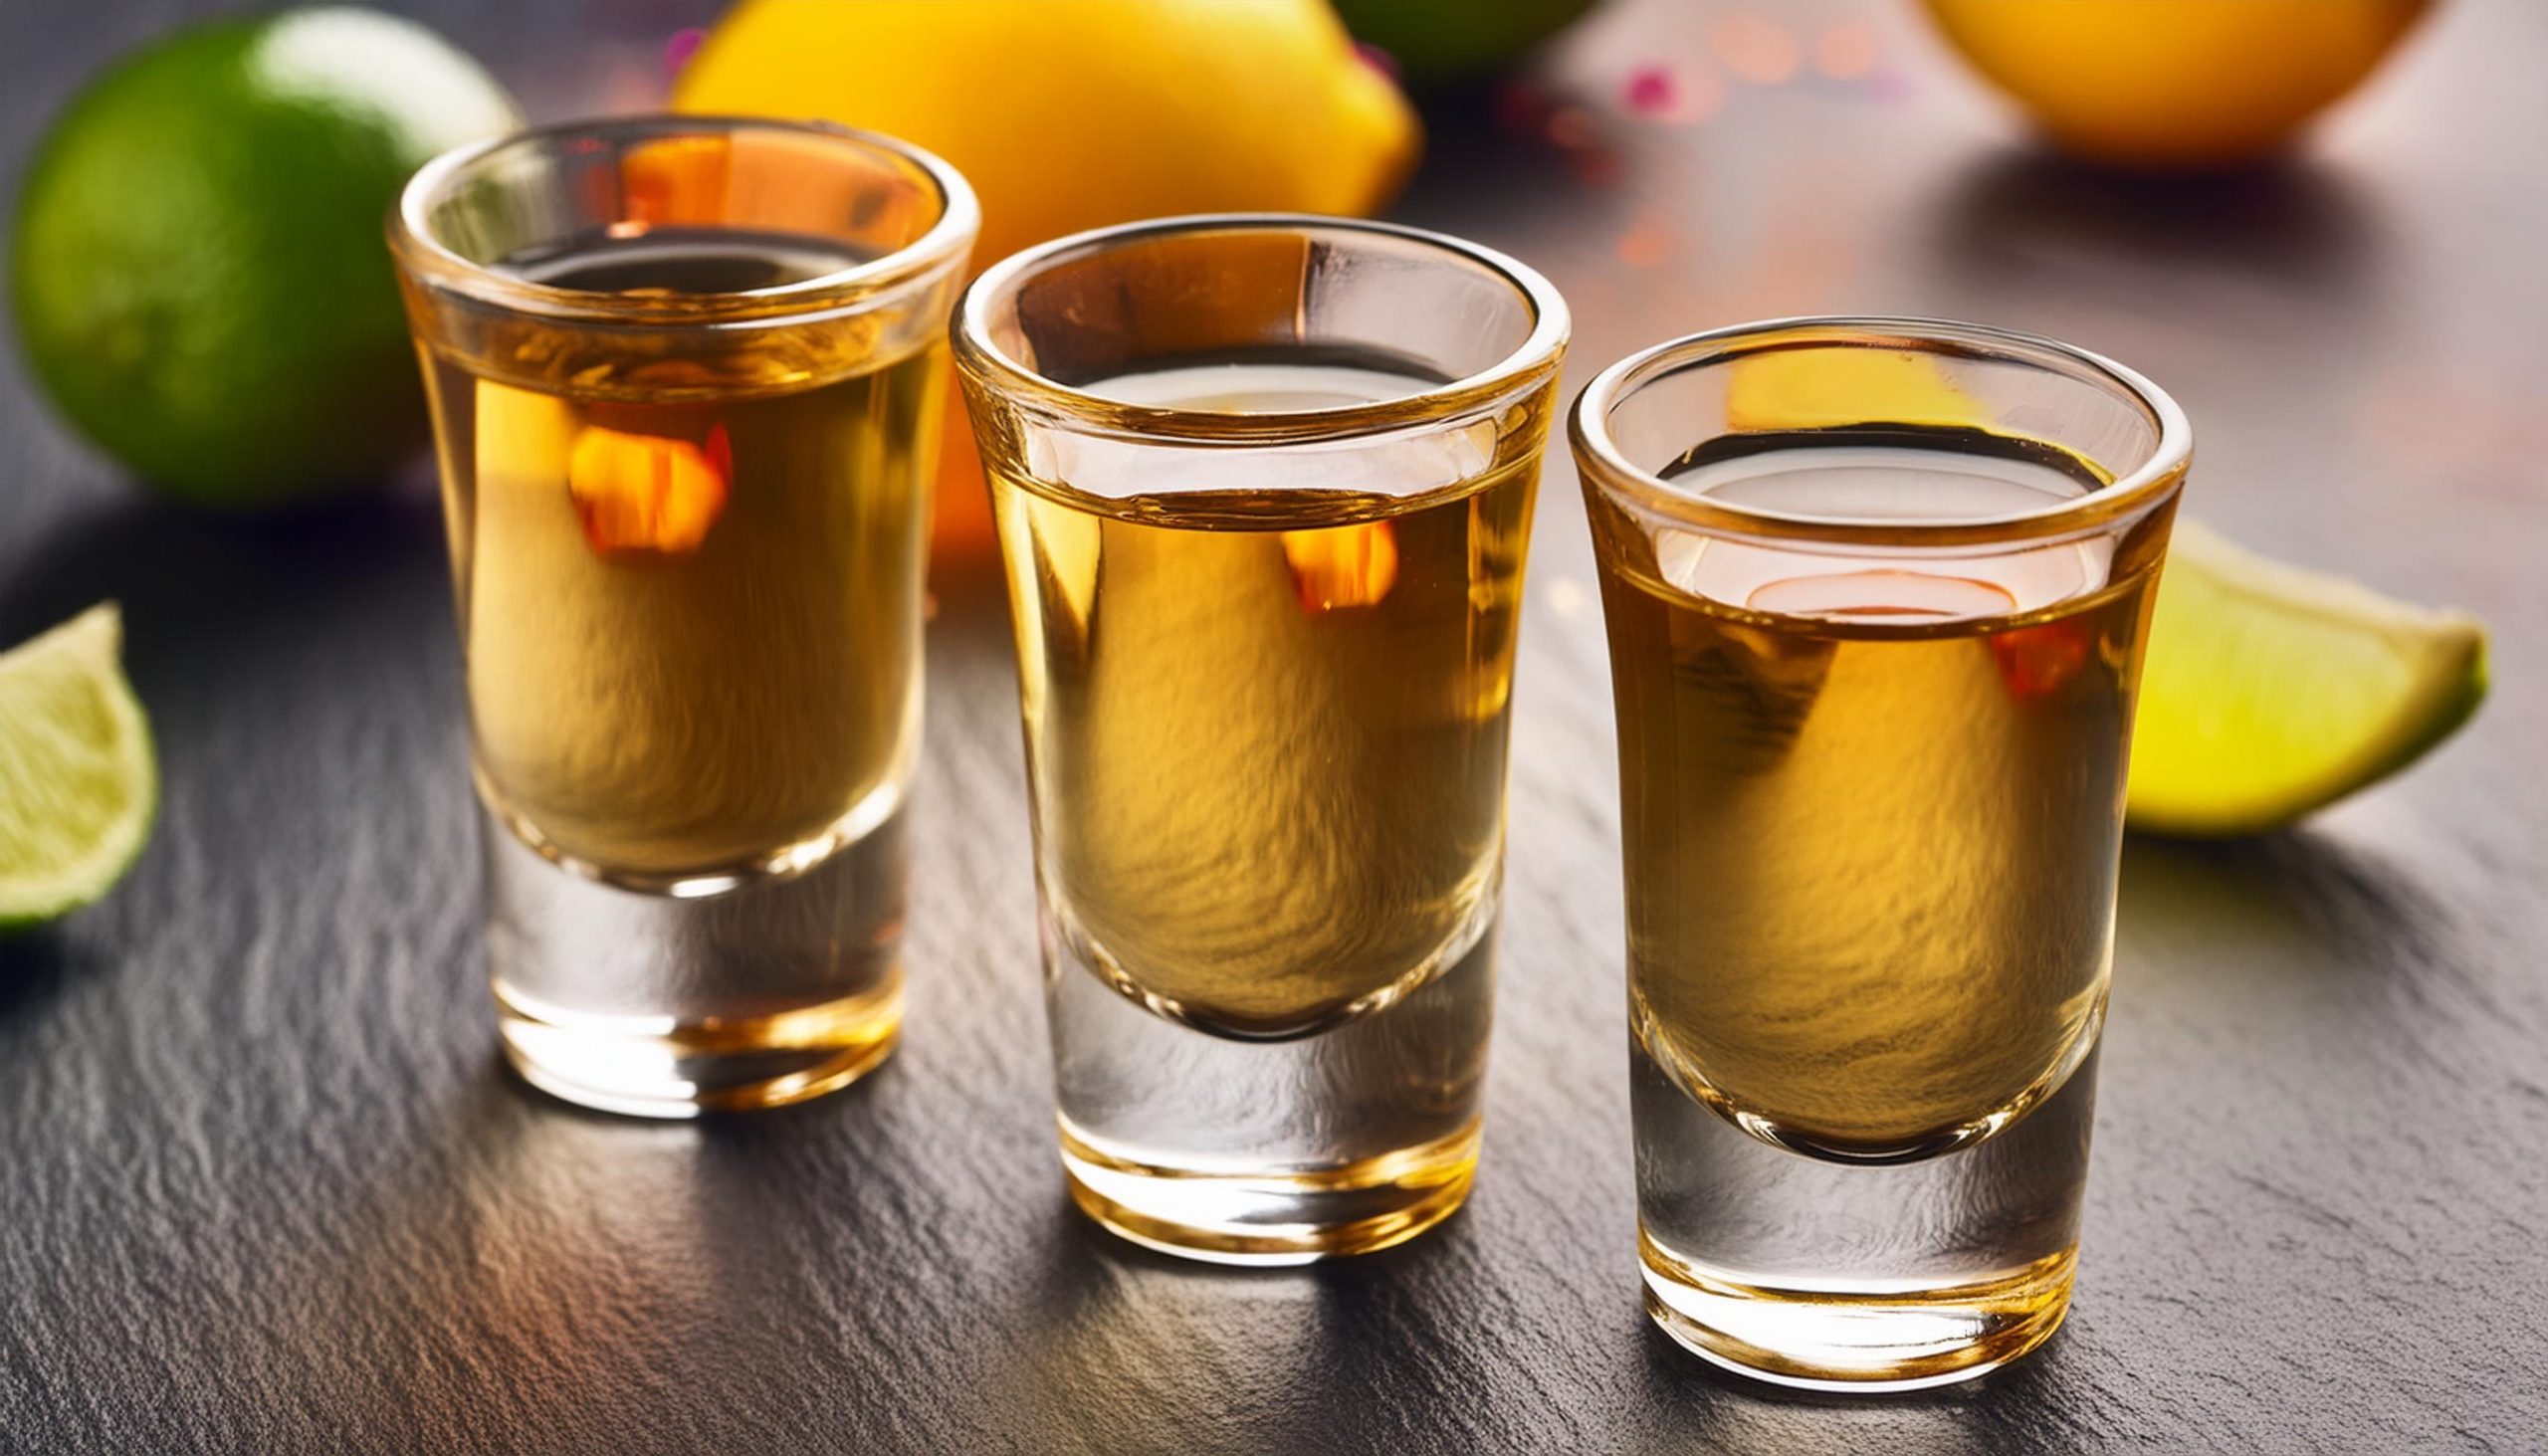 Three shot glasses filled with Reposado Tequila